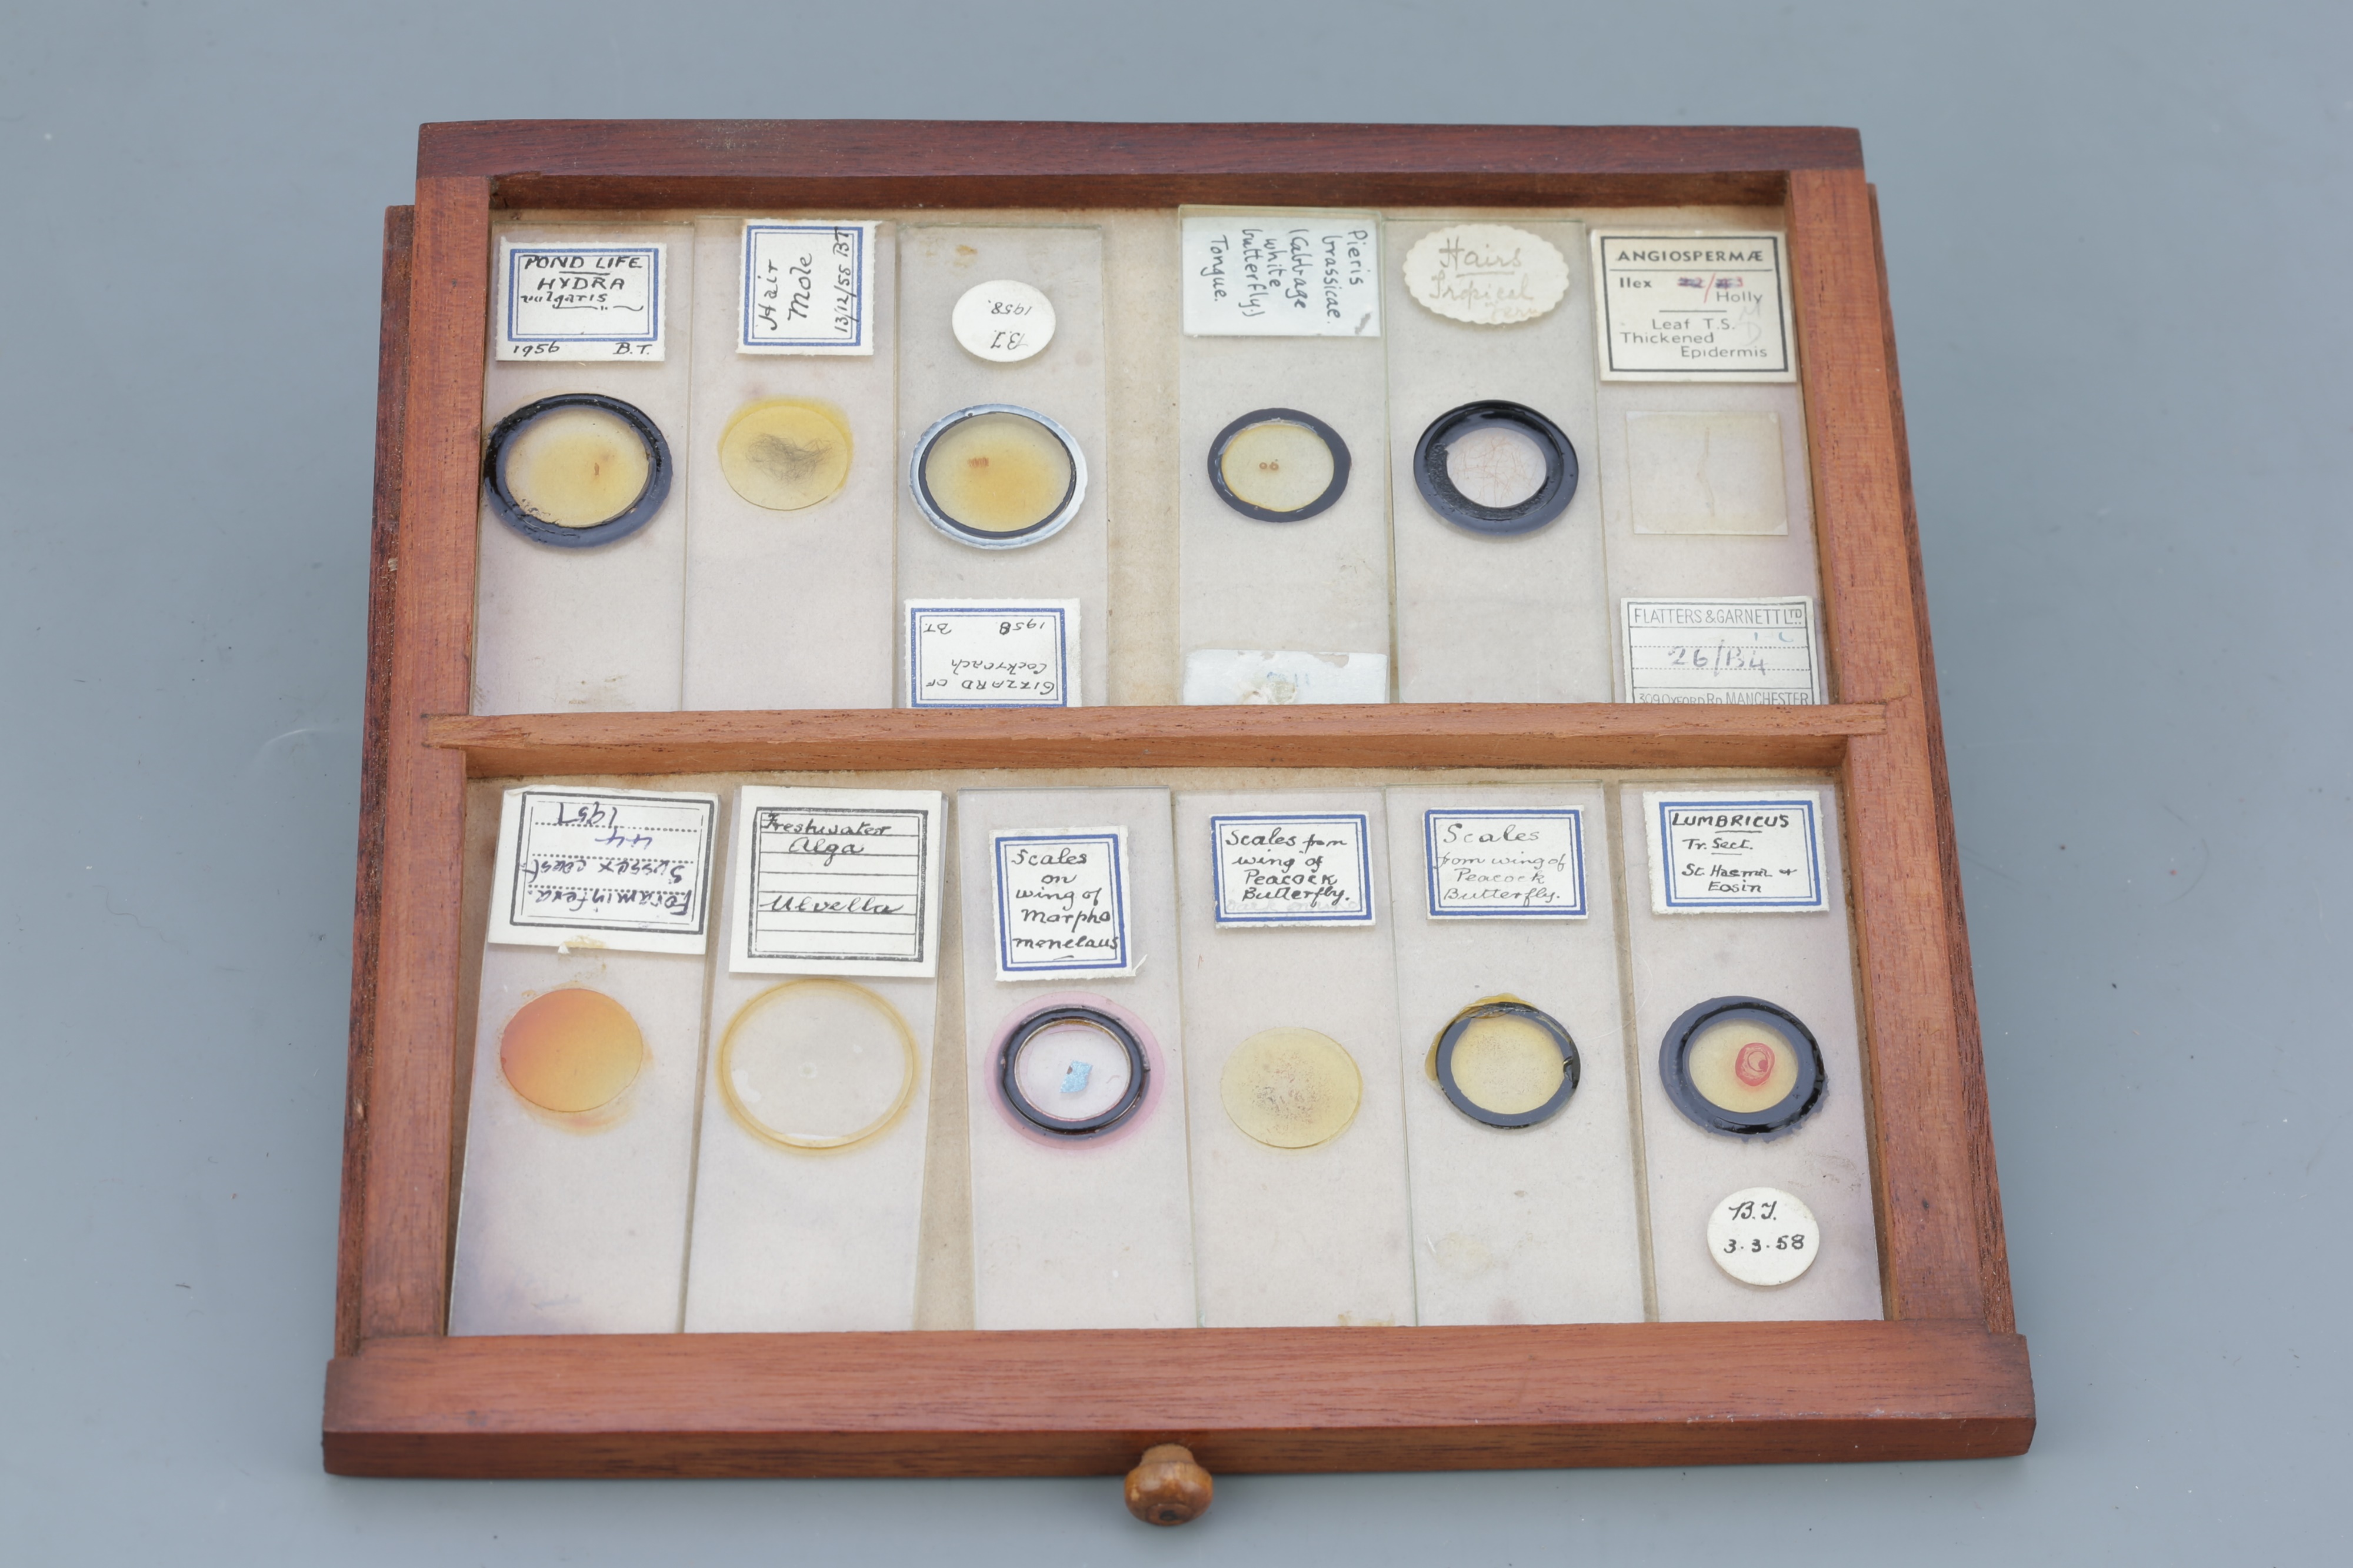 Microscope SlideCabinet & Slide Collection, - Image 9 of 15